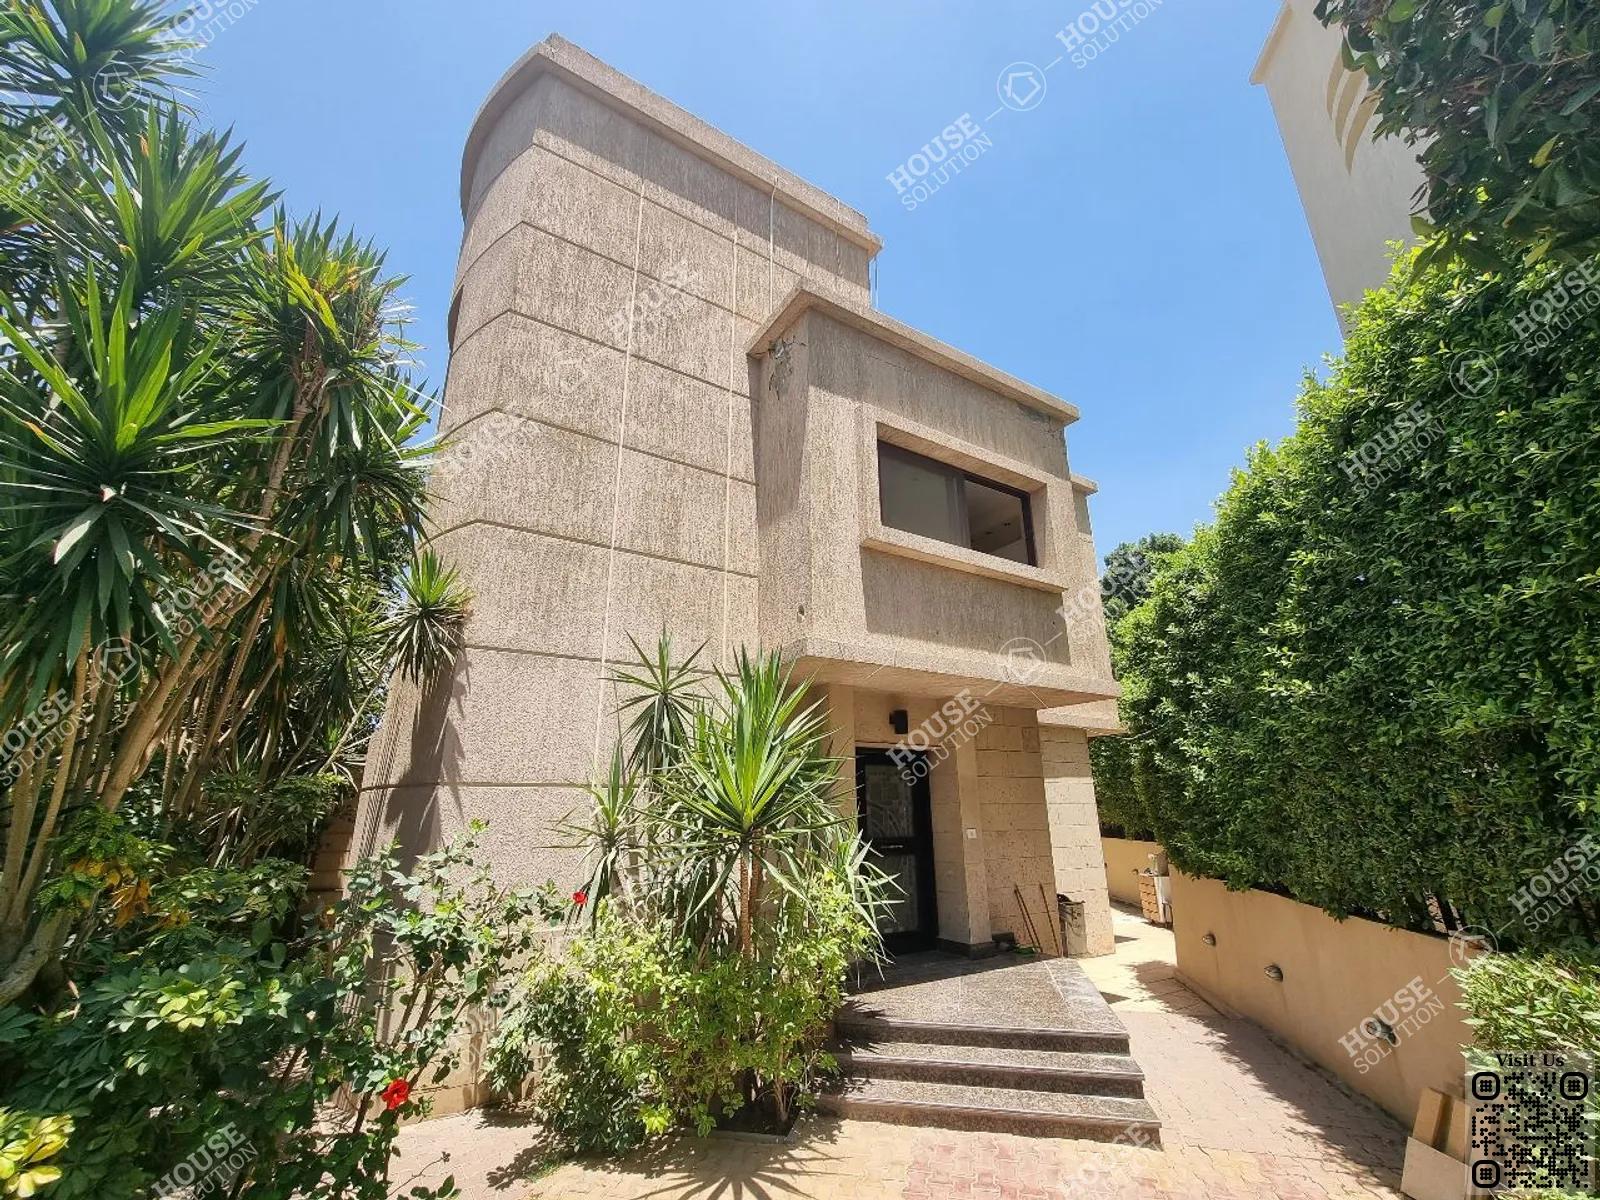 OUTSIDE VIEW  @ Office spaces For Rent In Maadi Maadi Degla Area: 600 m² consists of 4 Bedrooms 4 Bathrooms Semi furnished 5 stars #5722-0